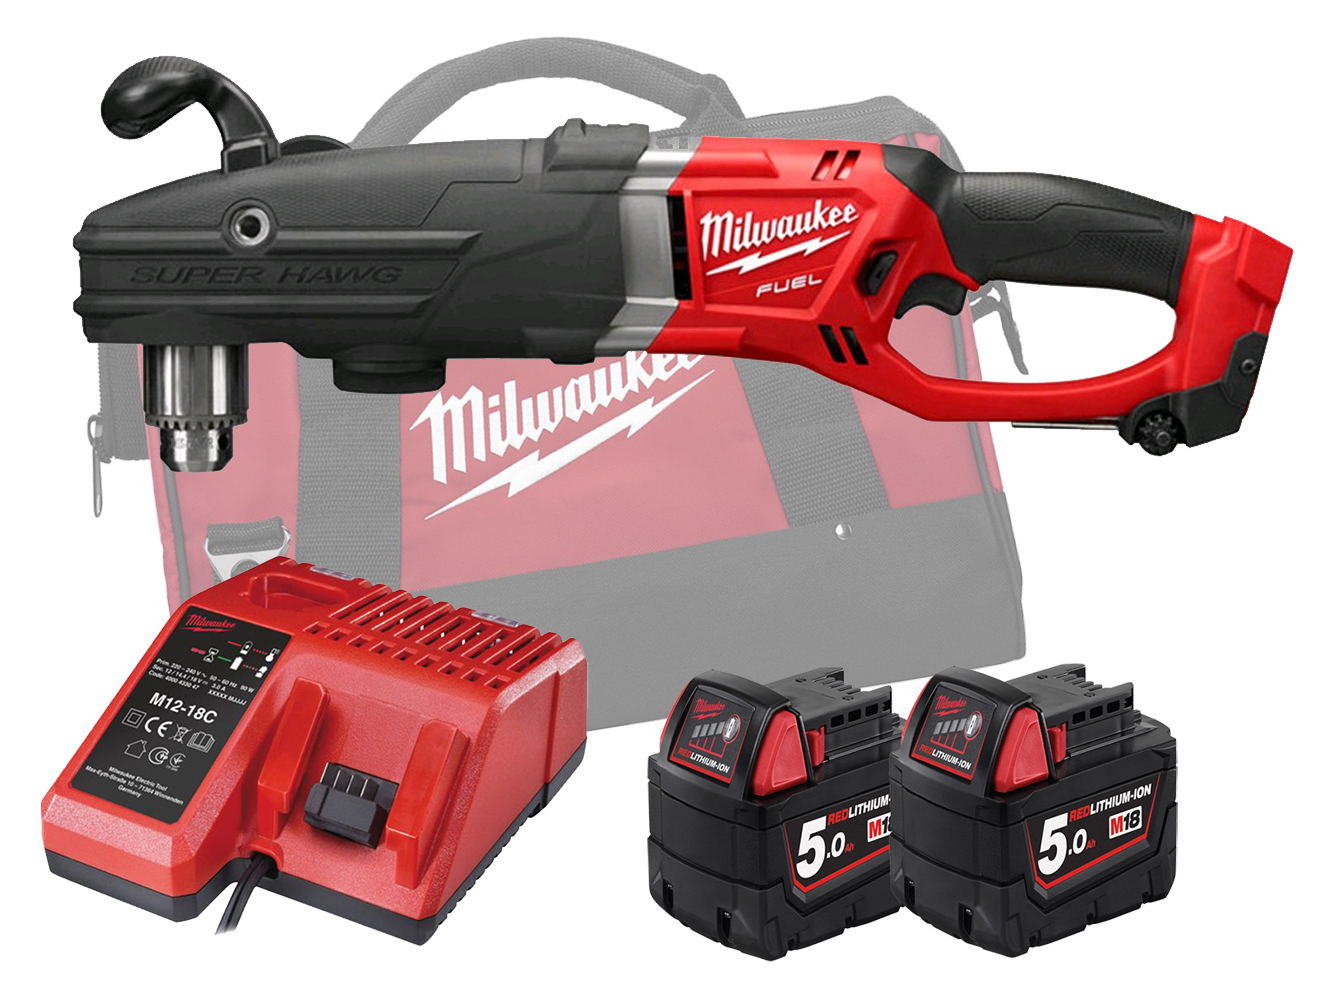 Milwaukee M18FRAD2 18V Fuel Super Hawg Right Angle Drill - 5.0Ah Pack